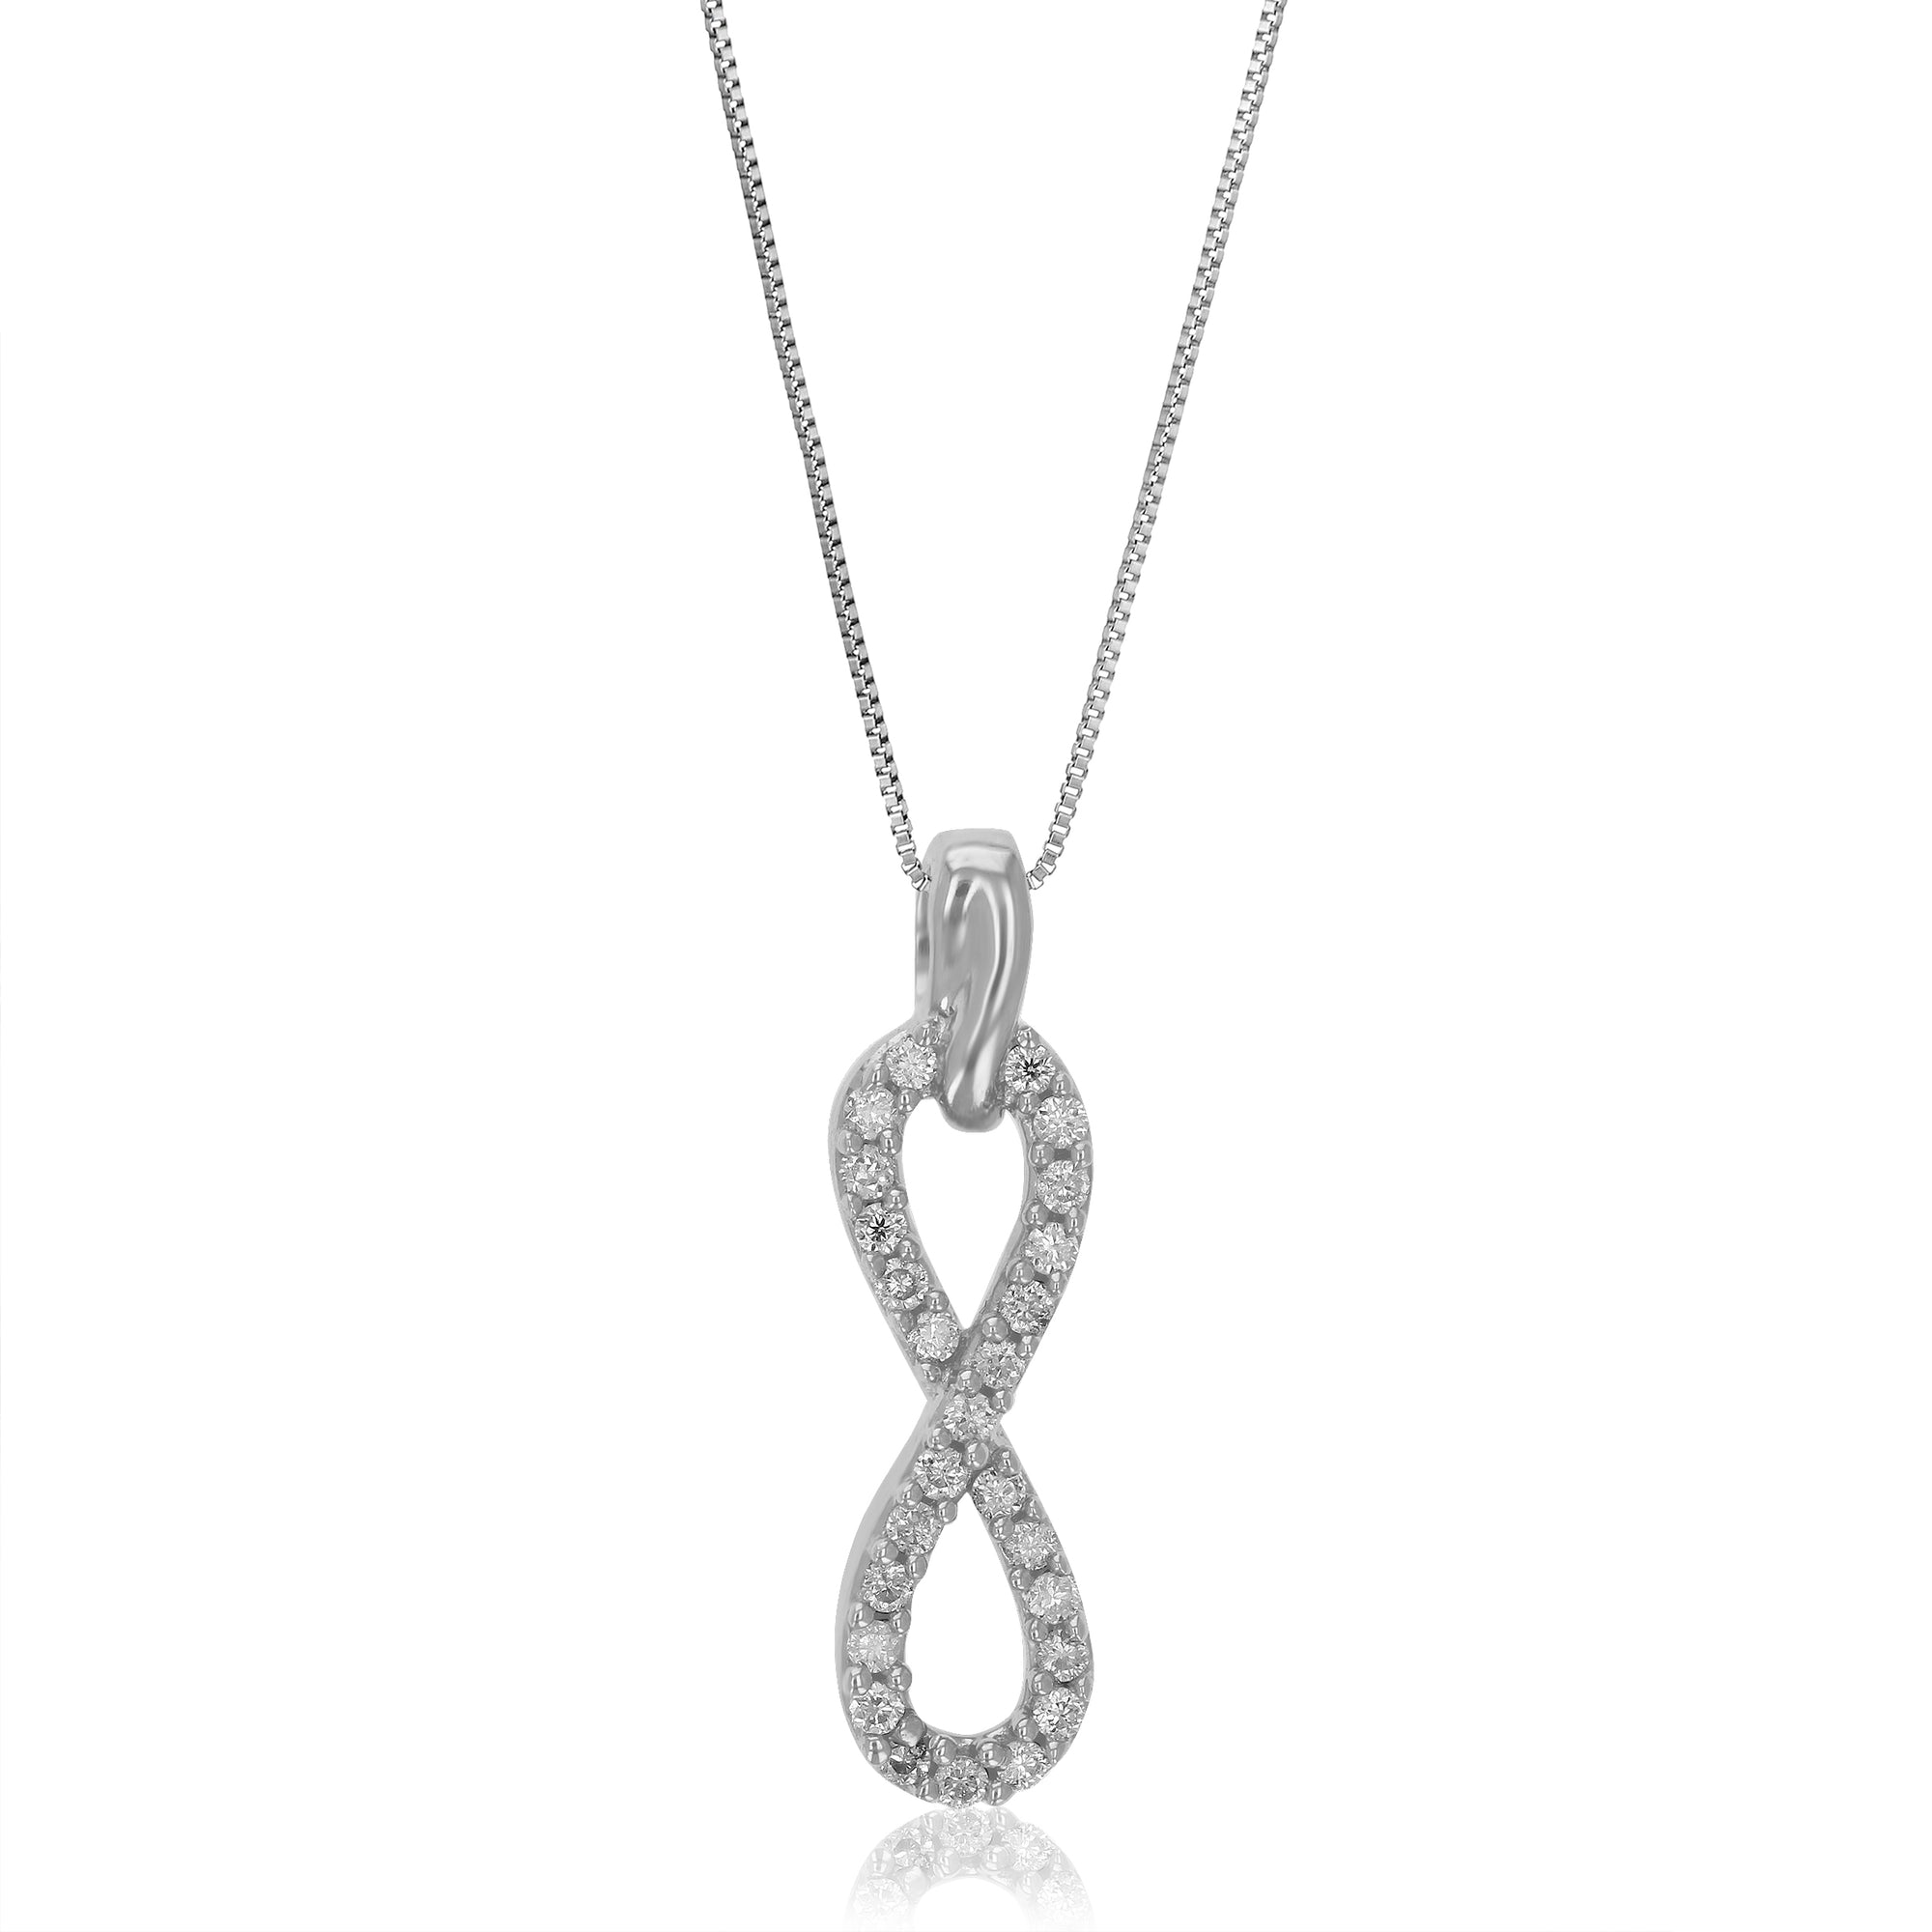 1/10 cttw Diamond Pendant Necklace for Women, Lab Grown Diamond Infinity Pendant Necklace in .925 Sterling Silver with Chain, Size 2/3 Inch